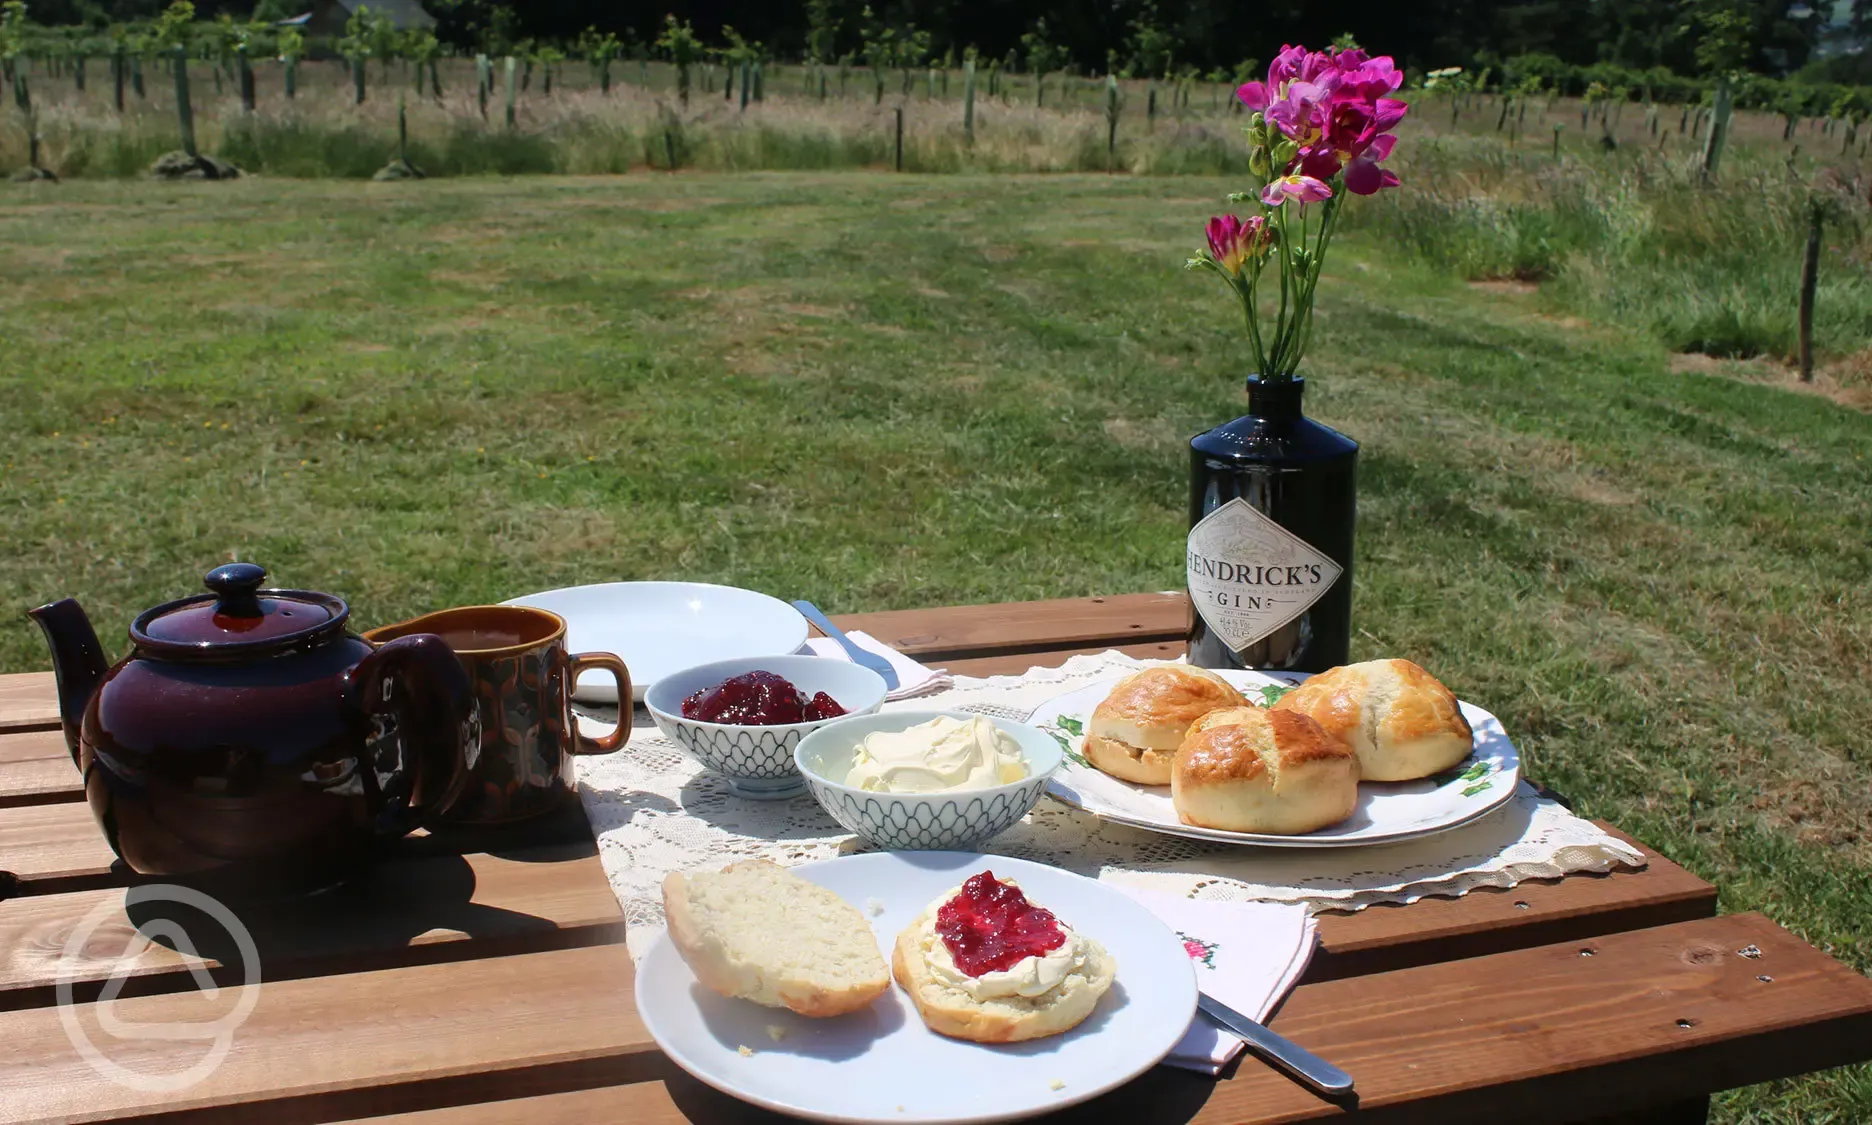 Afternoon tea on the picnic bench